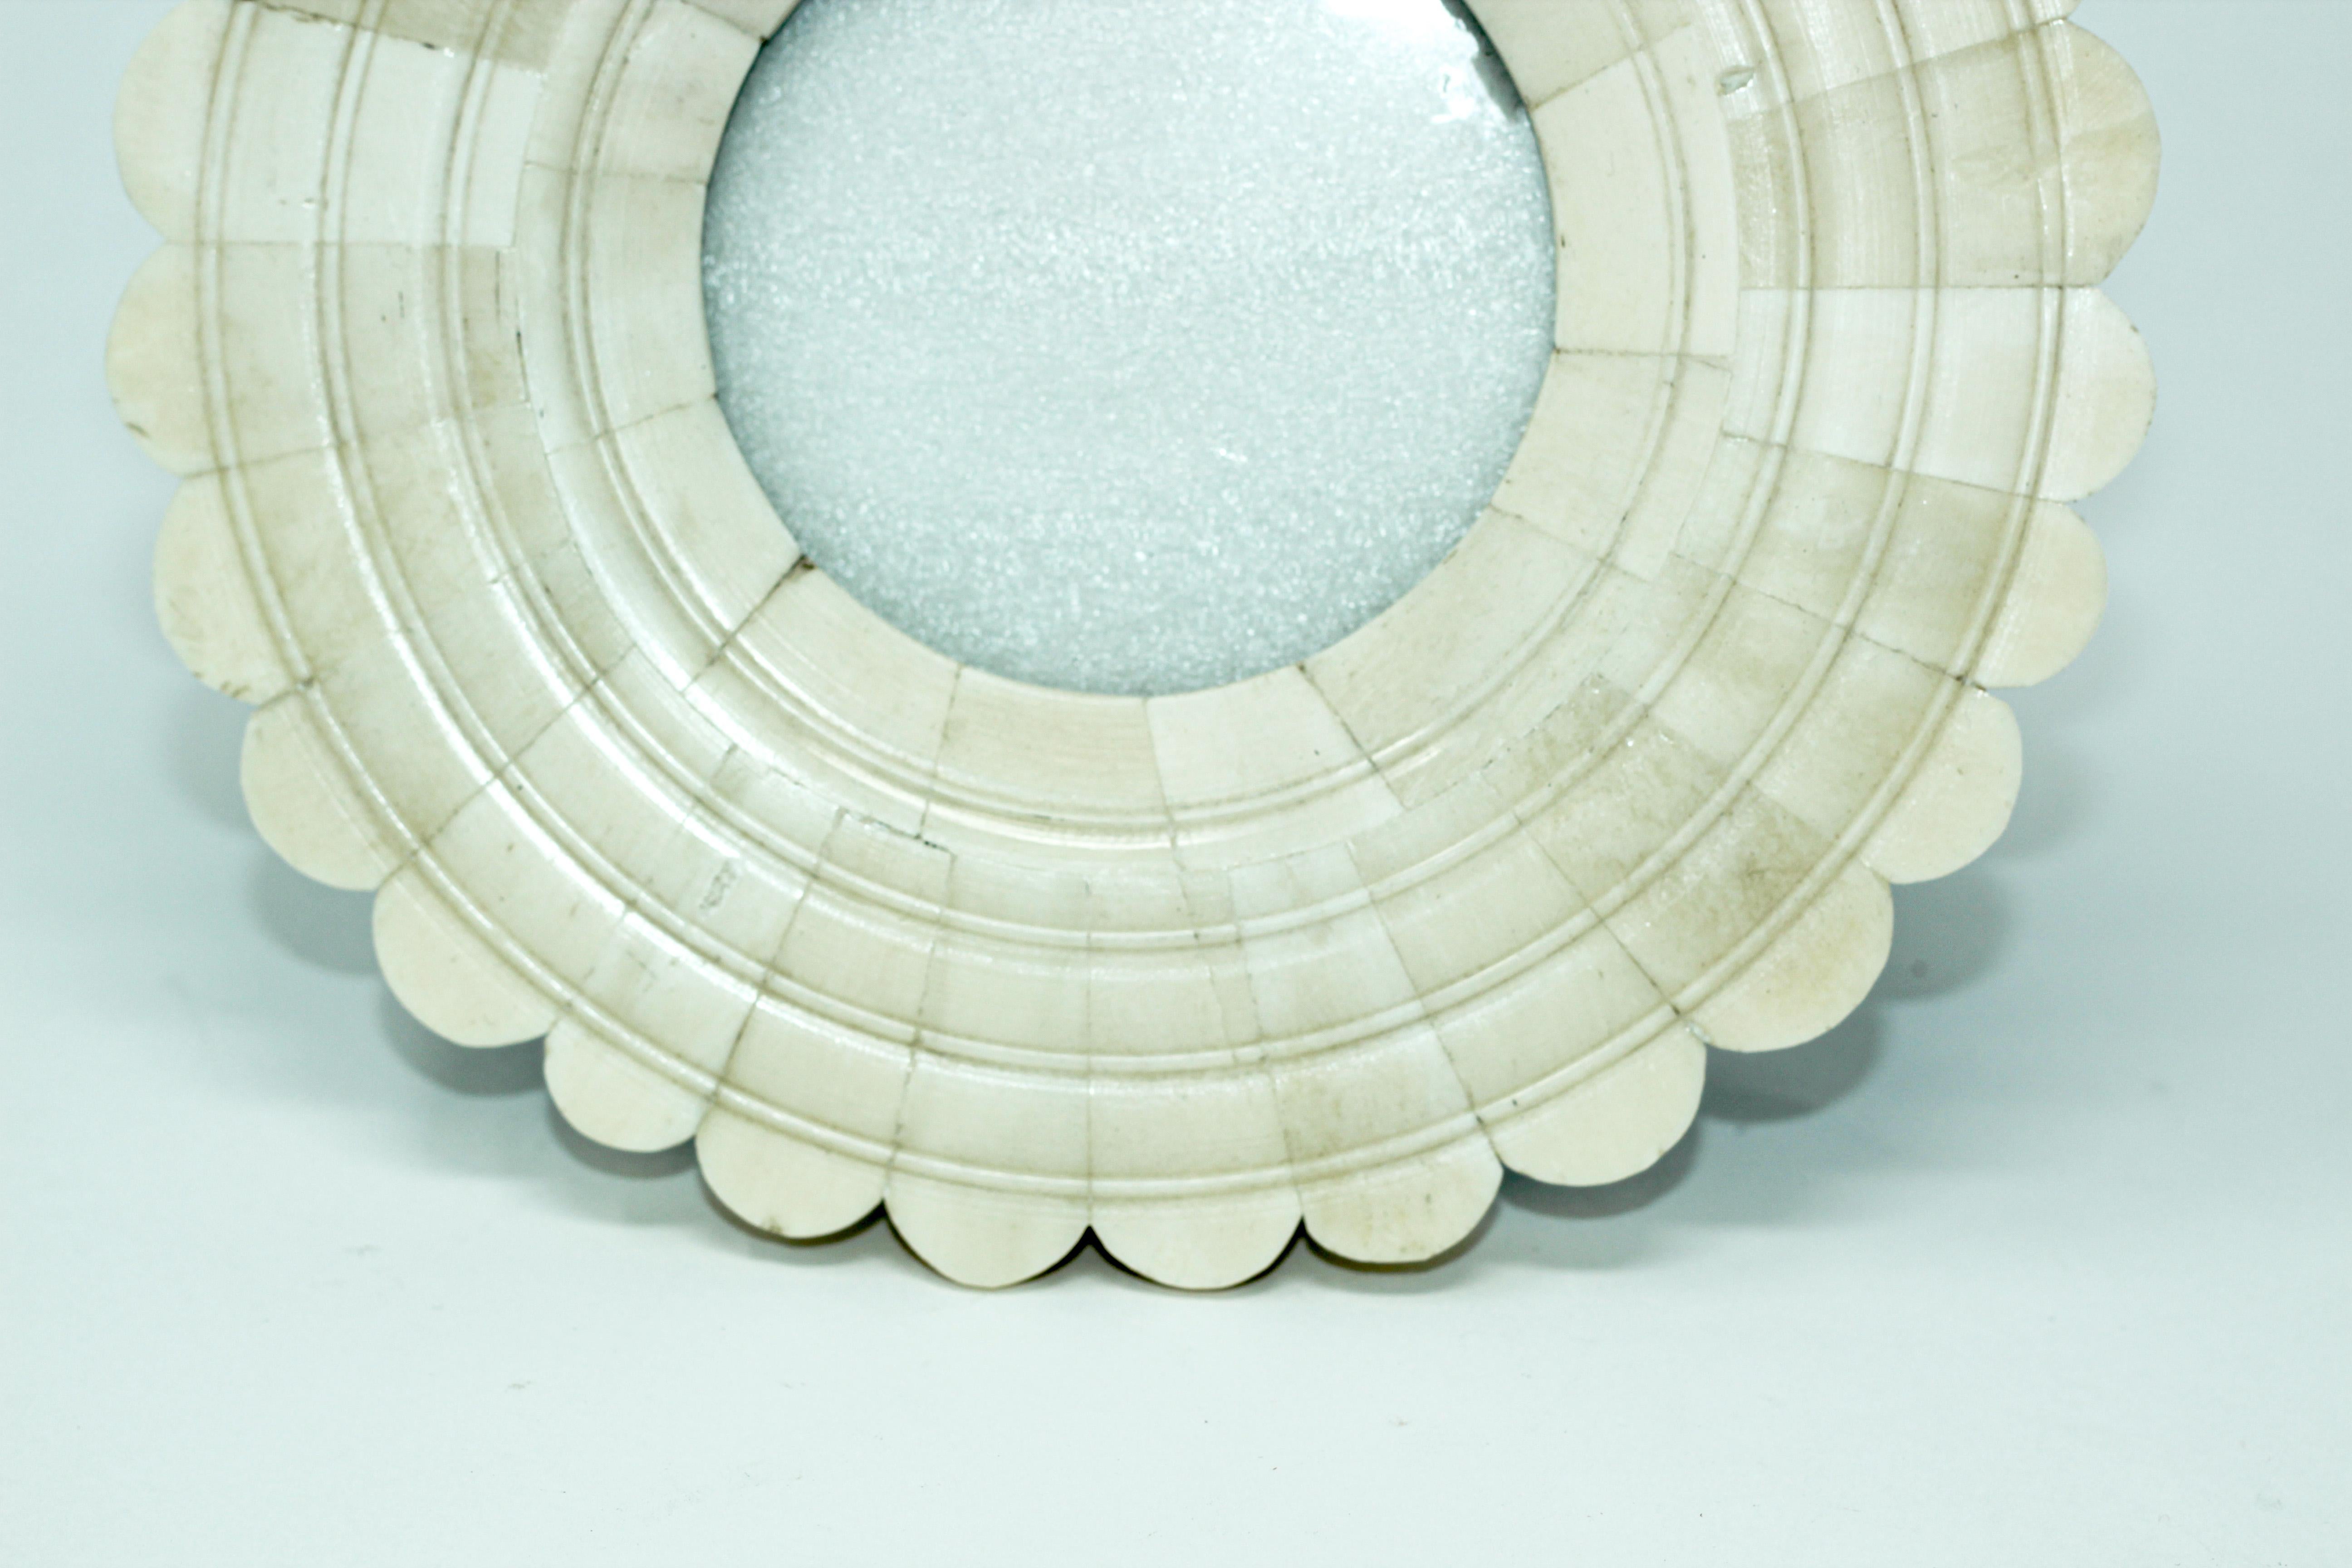 Round picture frame with scalloped white bone inlaid.
Nice small accent decorative picture frame handcrafted in India.